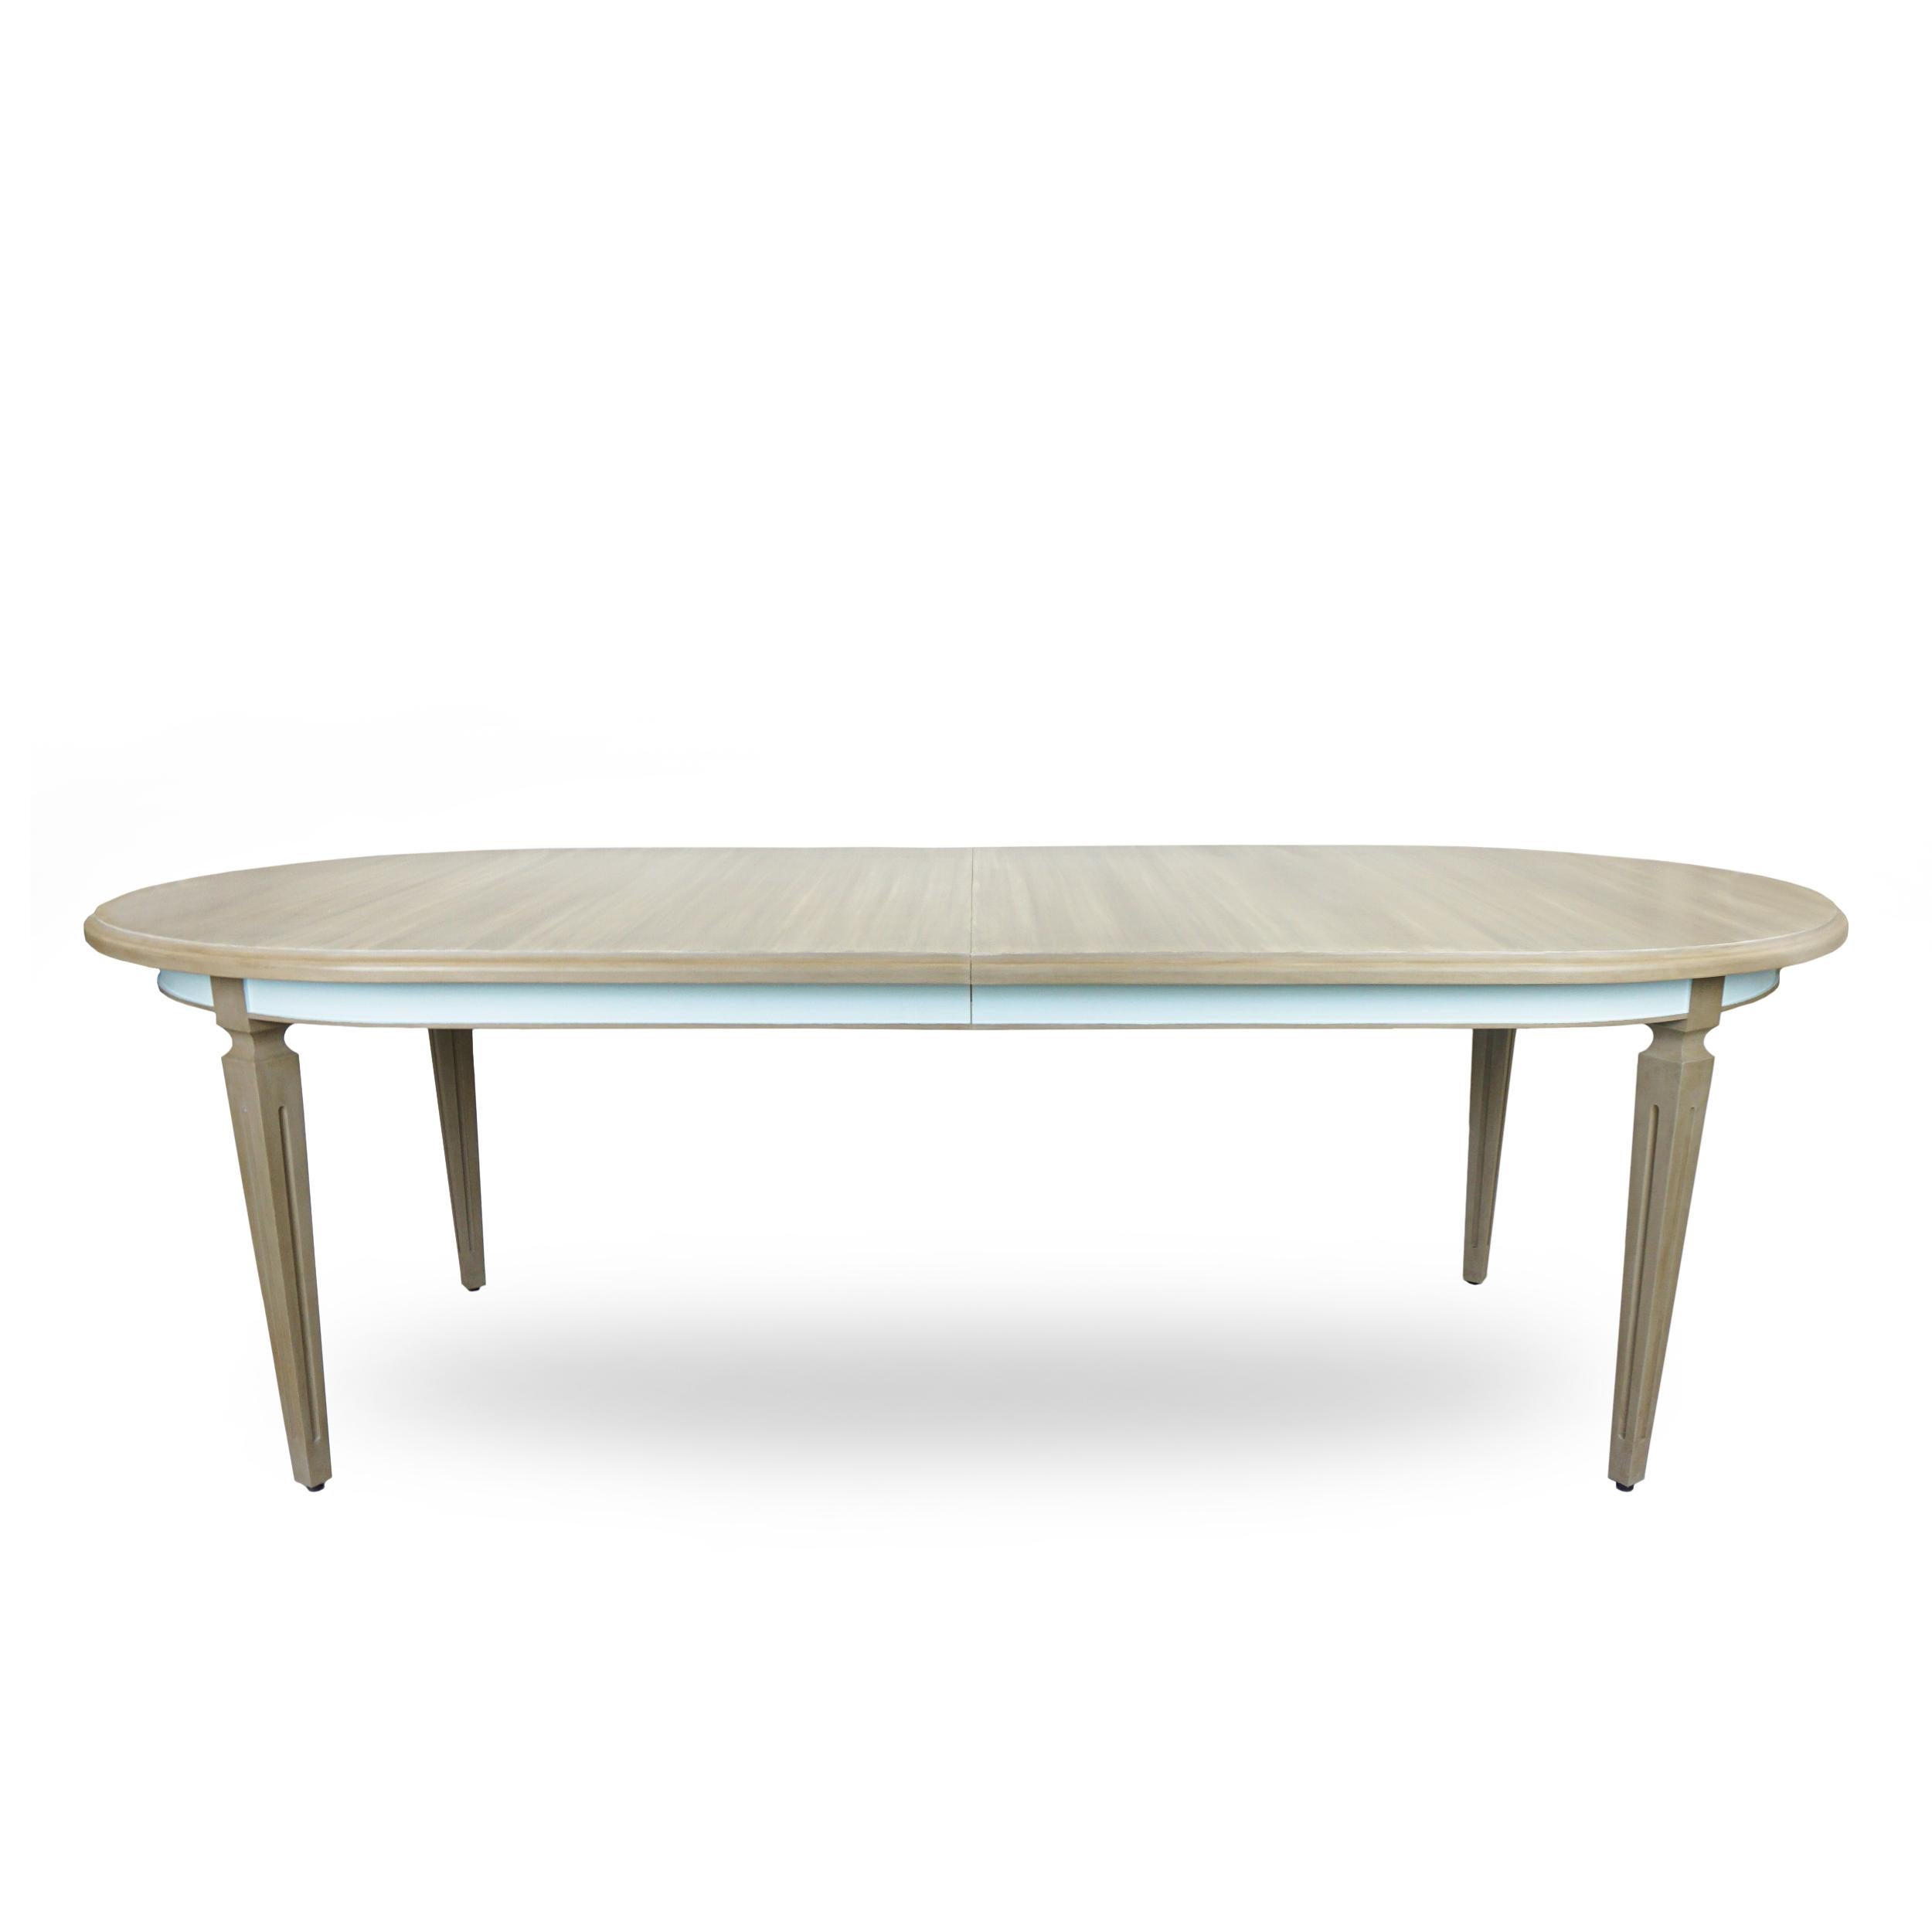 Classic in form, modern in finish, French style solid hard maple table with a custom paint finish. 84